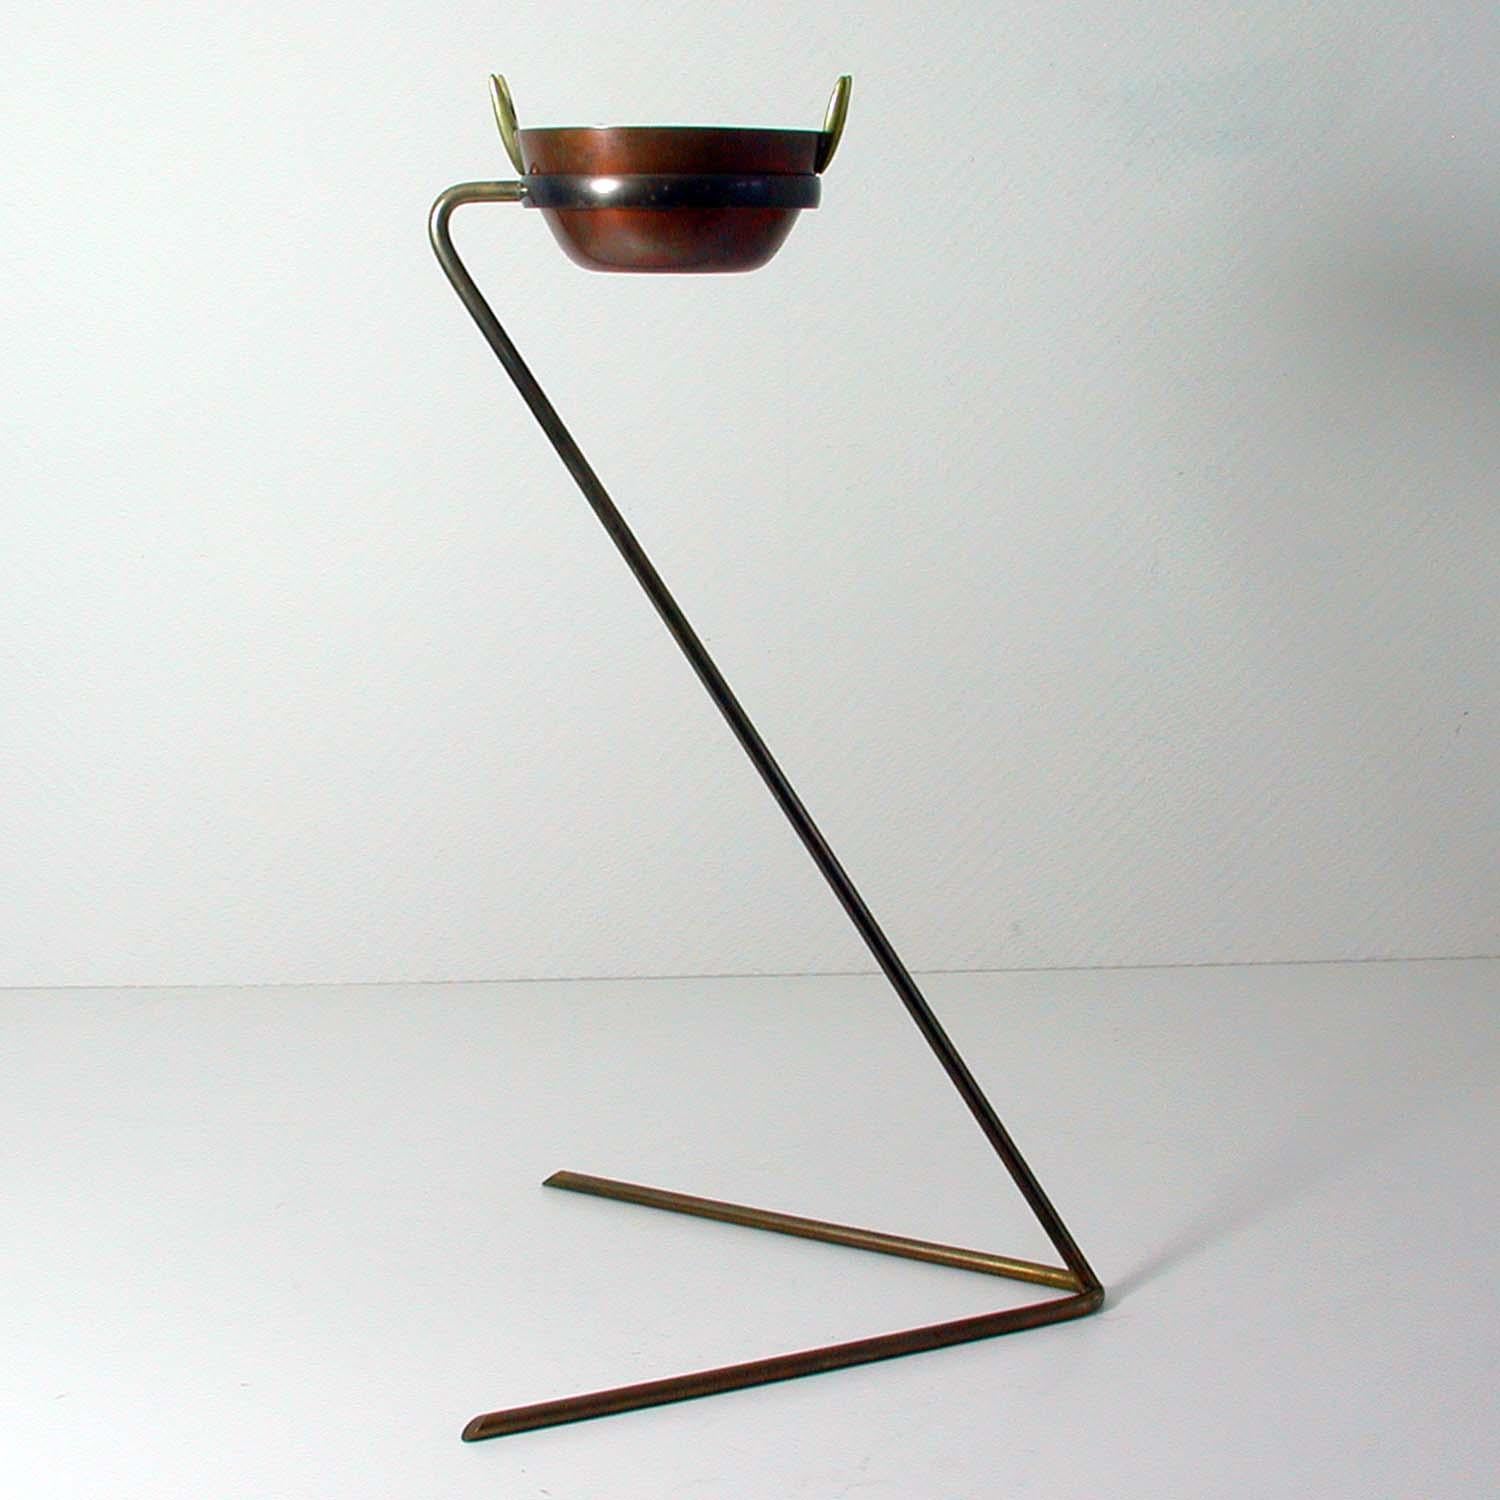 This very rare 1950s standing floor ashtray was designed by Carl Auböck and produced by Carl Auböck Wertstatten in Vienna in the 1950s.

It has got a brass stand and a removable copper and brass ashtray.

Condition is very good with a lovely